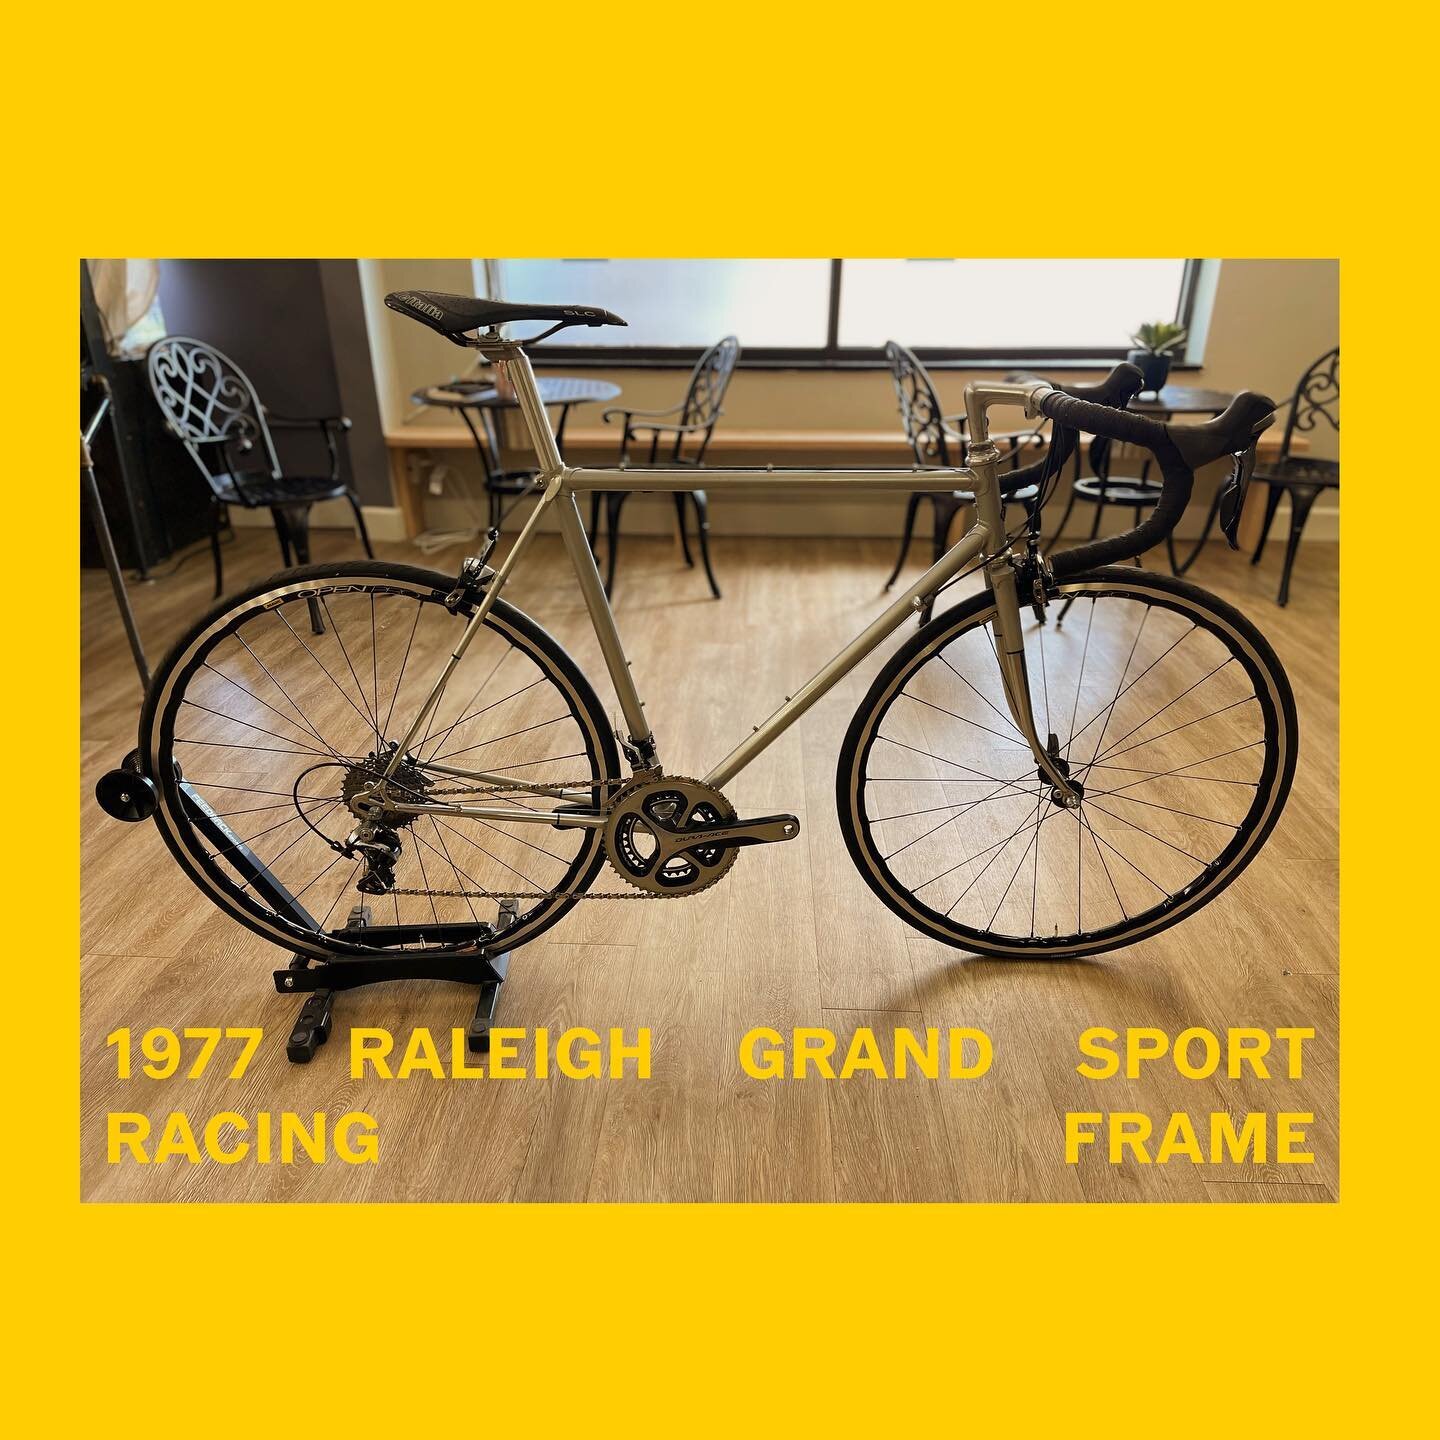 1977 Raleigh Grand Sport racing Frame!!!! Check out our story for more details on this sweet auction, but THIS could be YOURS by the end of the day. Starting bid is $750. From now until 12pm we will be playing Stage 15 of @letourdefrance ! This inclu